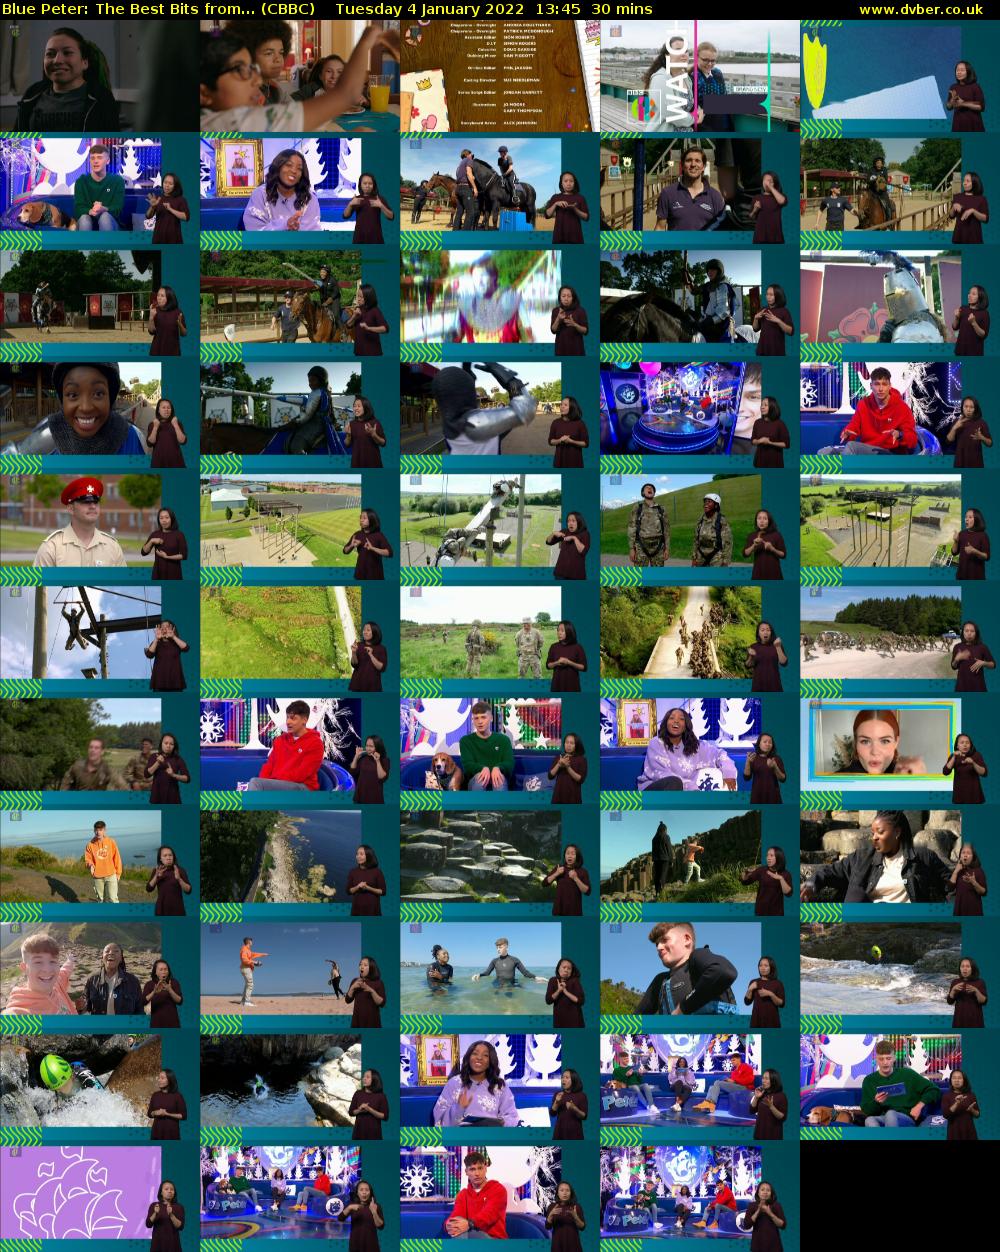 Blue Peter: The Best Bits from... (CBBC) Tuesday 4 January 2022 13:45 - 14:15